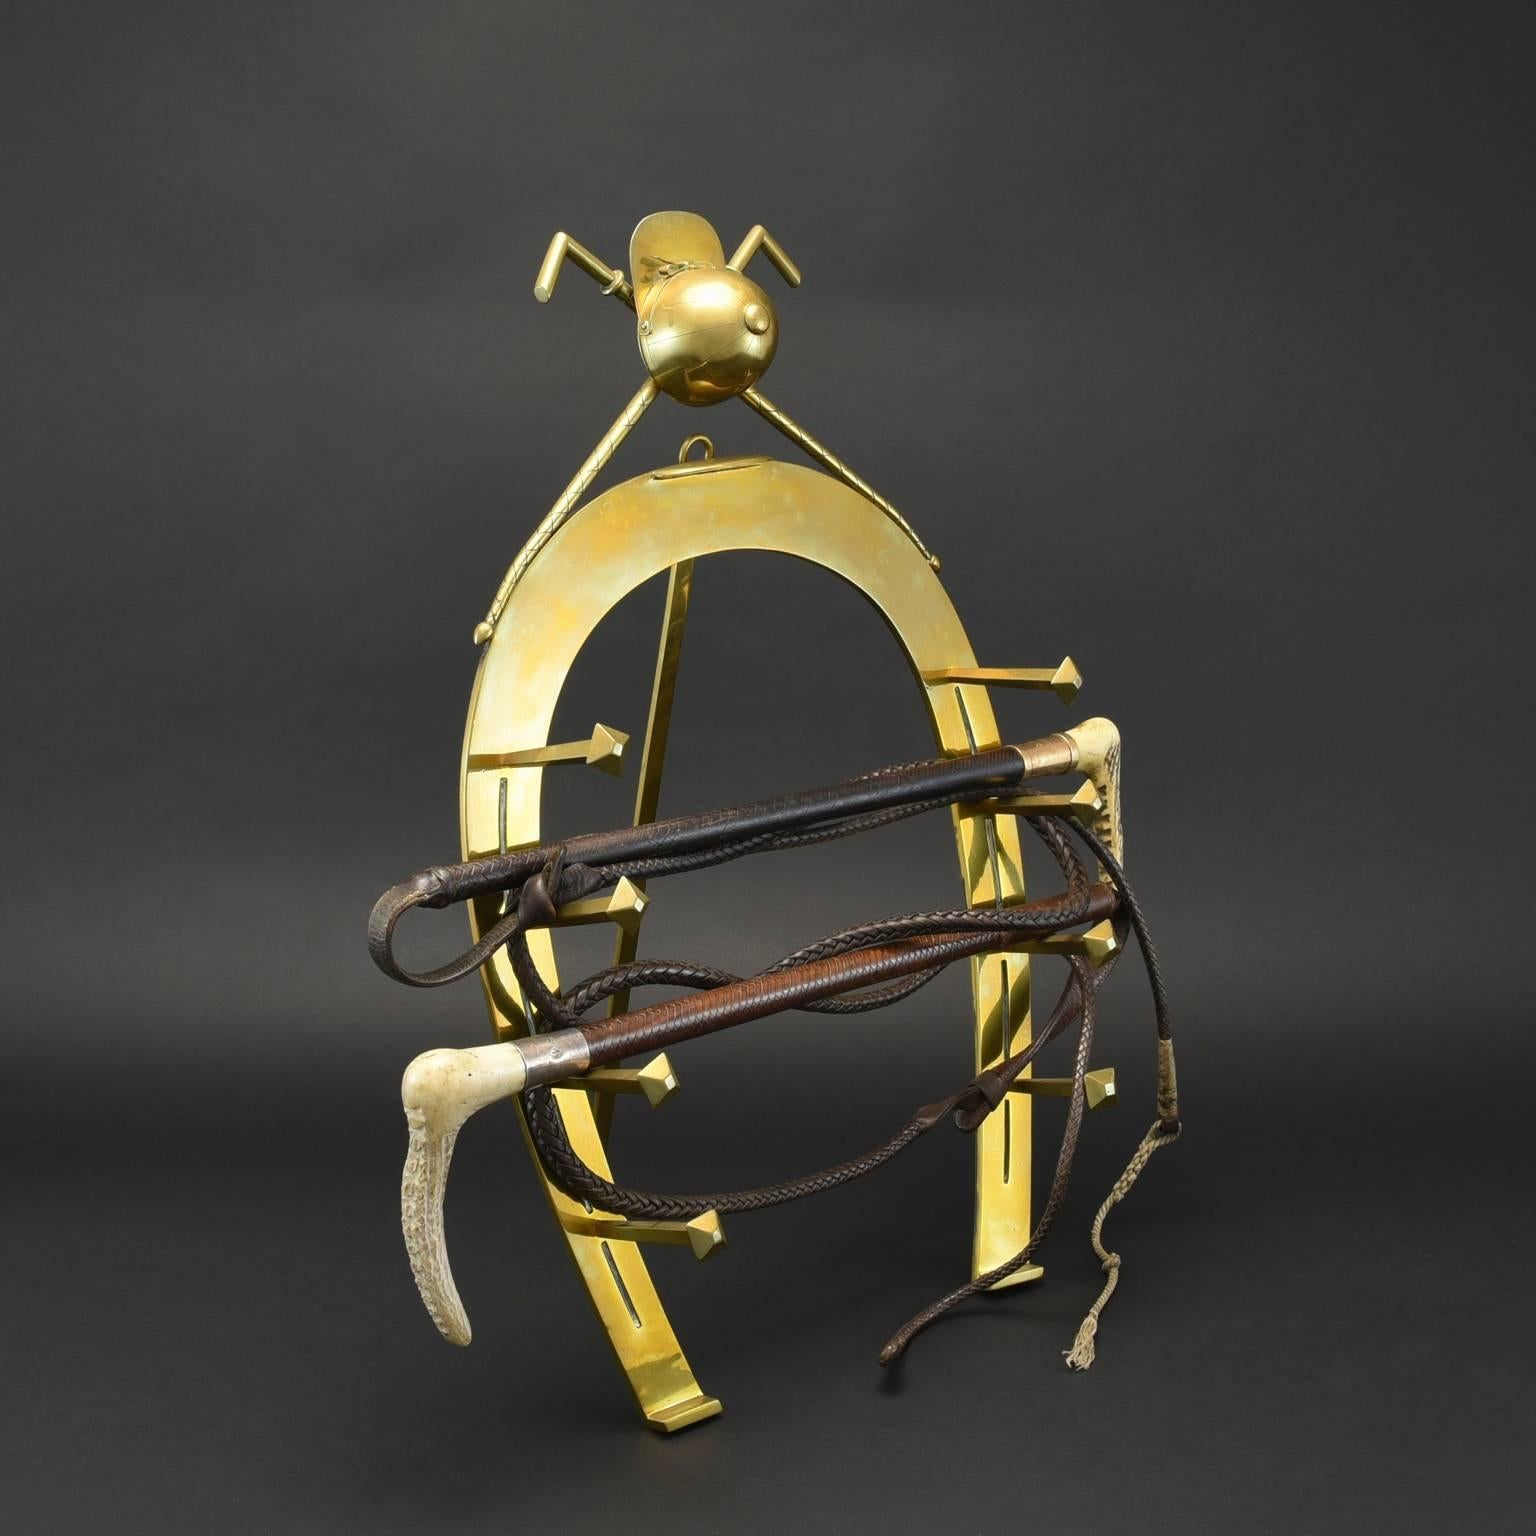 Large-scale Victorian brass whip rack in the shape of a Horseshoe surmounted by a jockey's cap and crossed whips. Has a single central foot stand to the rear but also has a ring so it can be hung on the wall.
This is a rare piece of top quality and